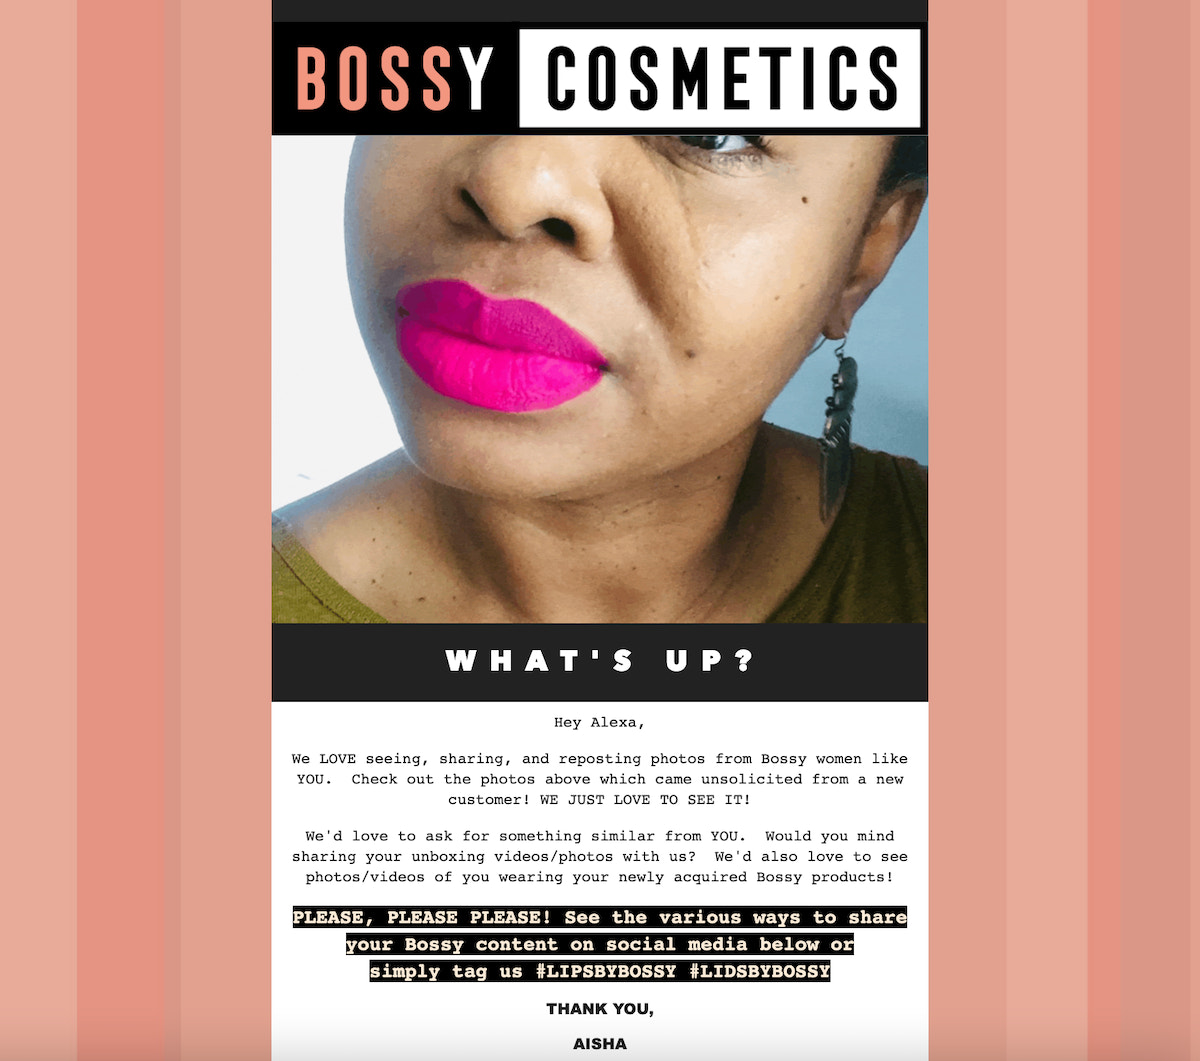 An email from Bossy Cosmetics that asks for user generated content